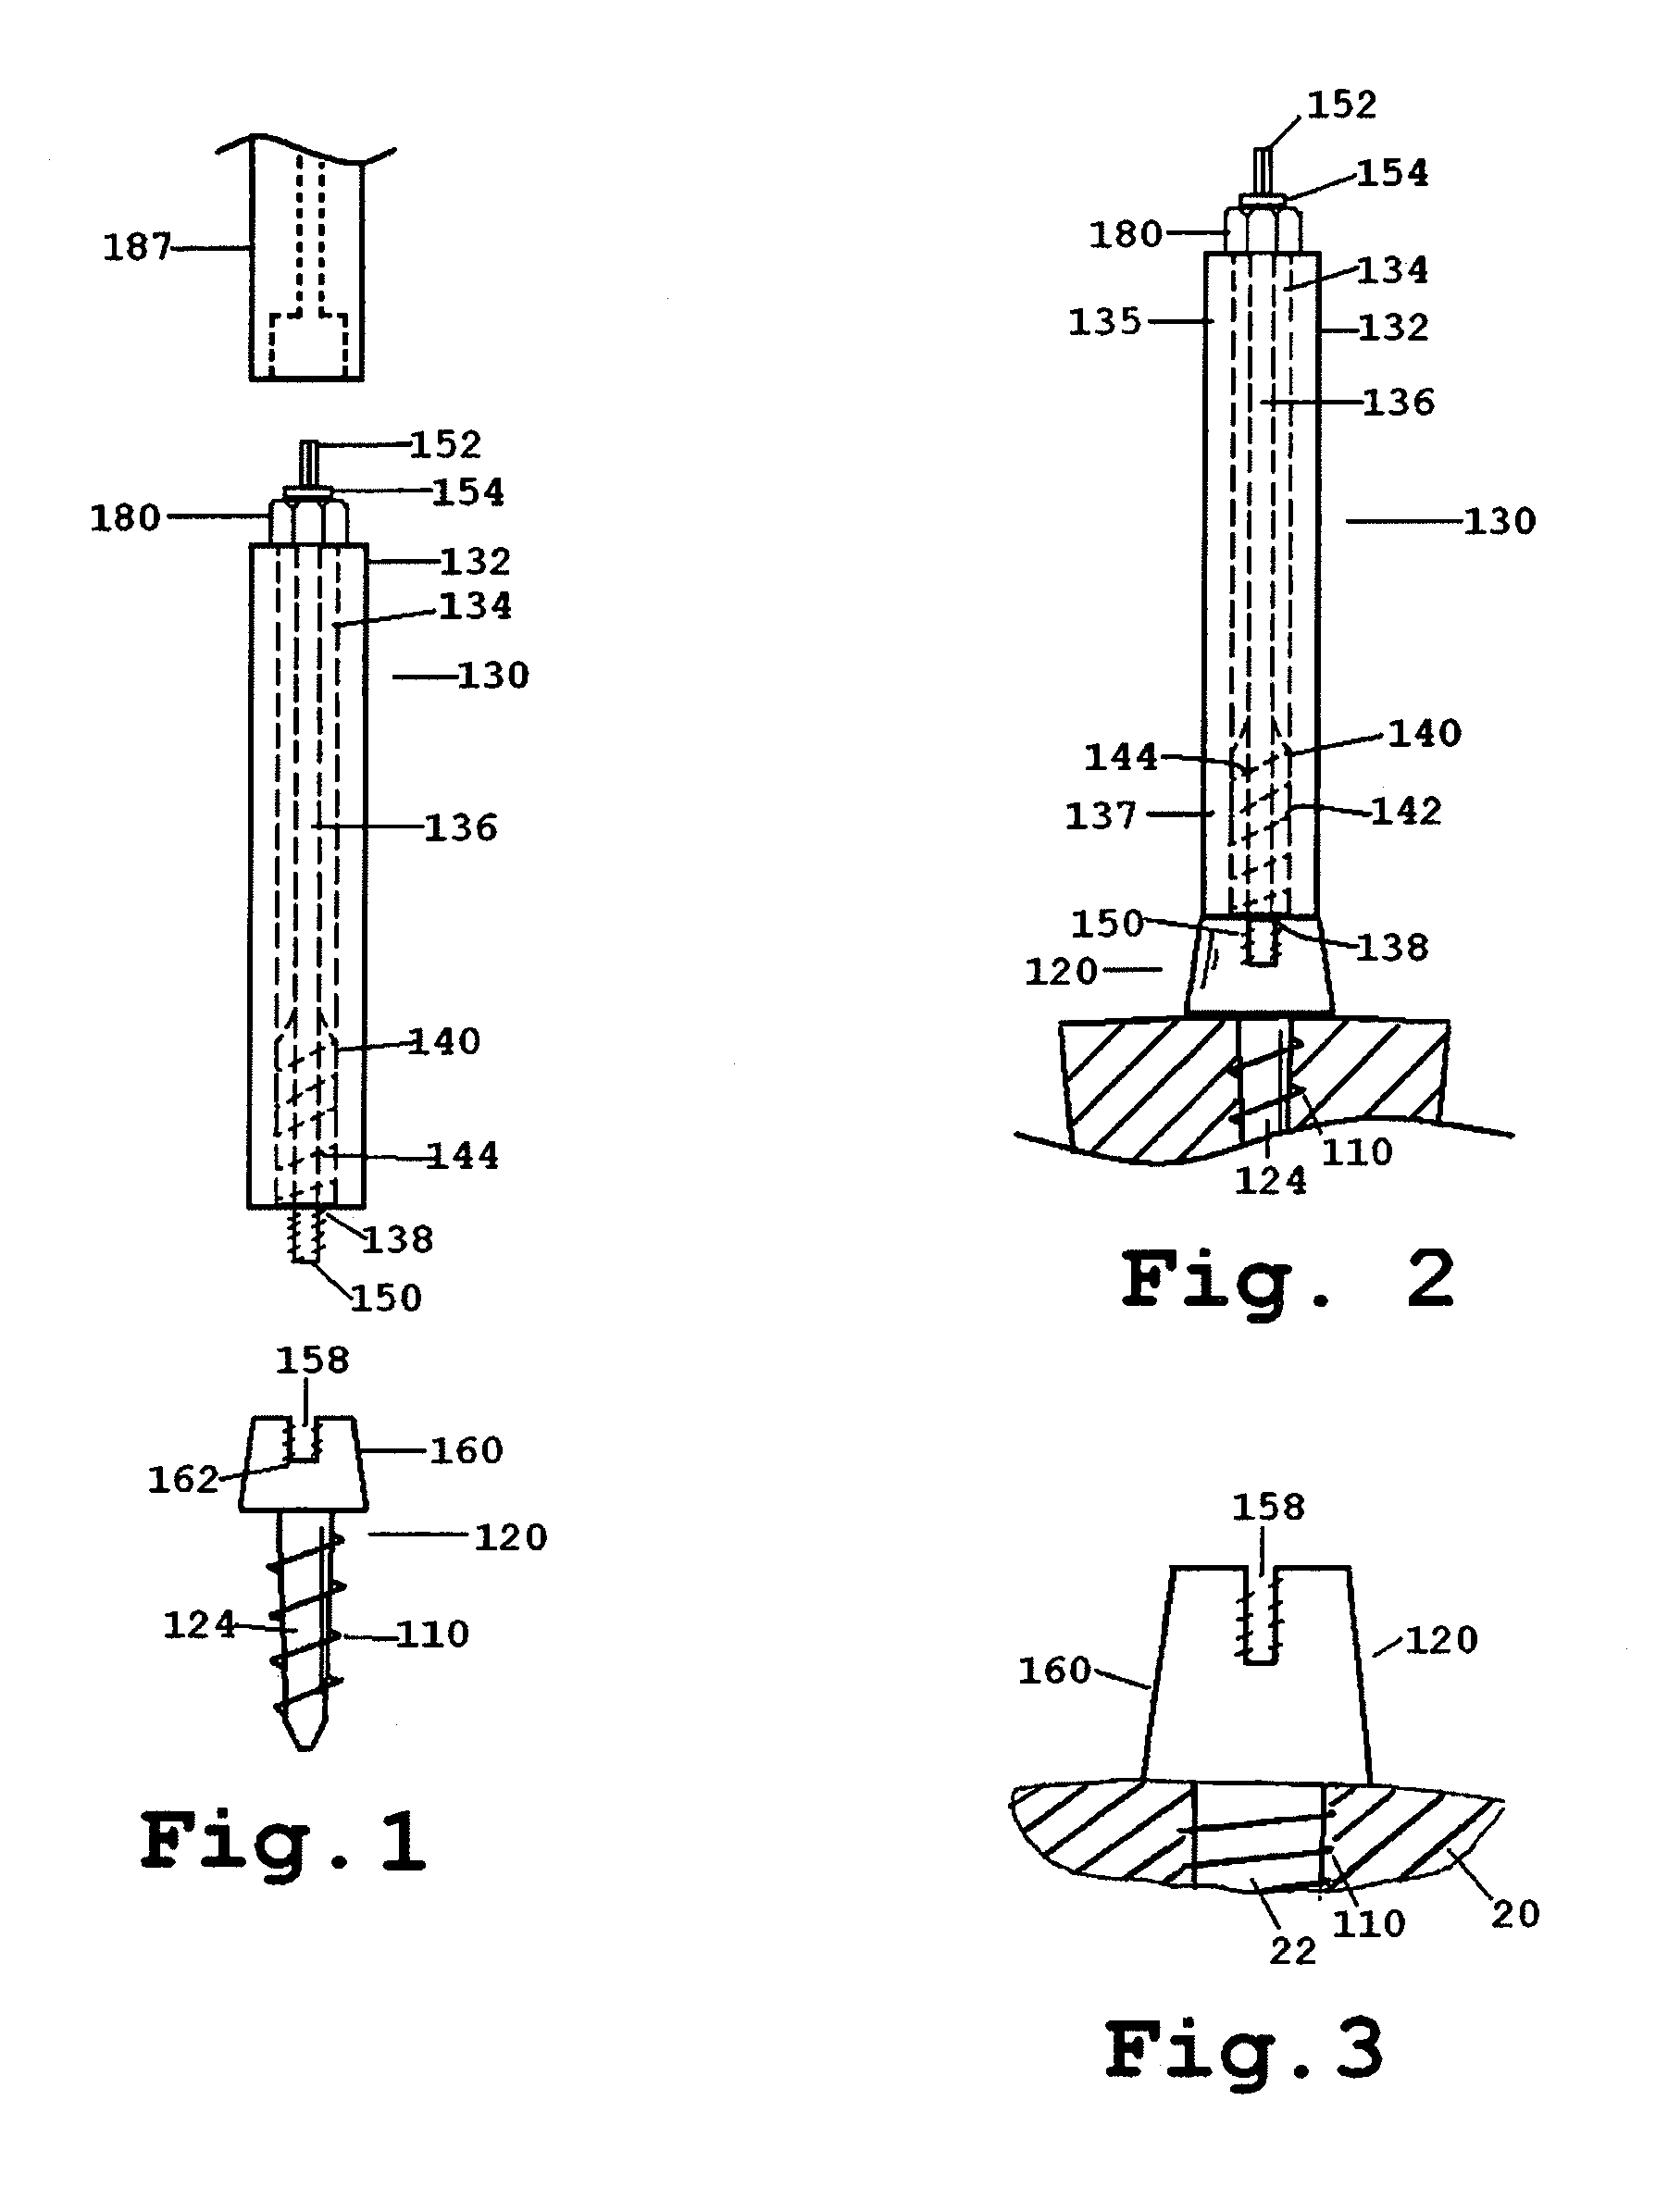 Distraction screw for skeletal surgery and method of use